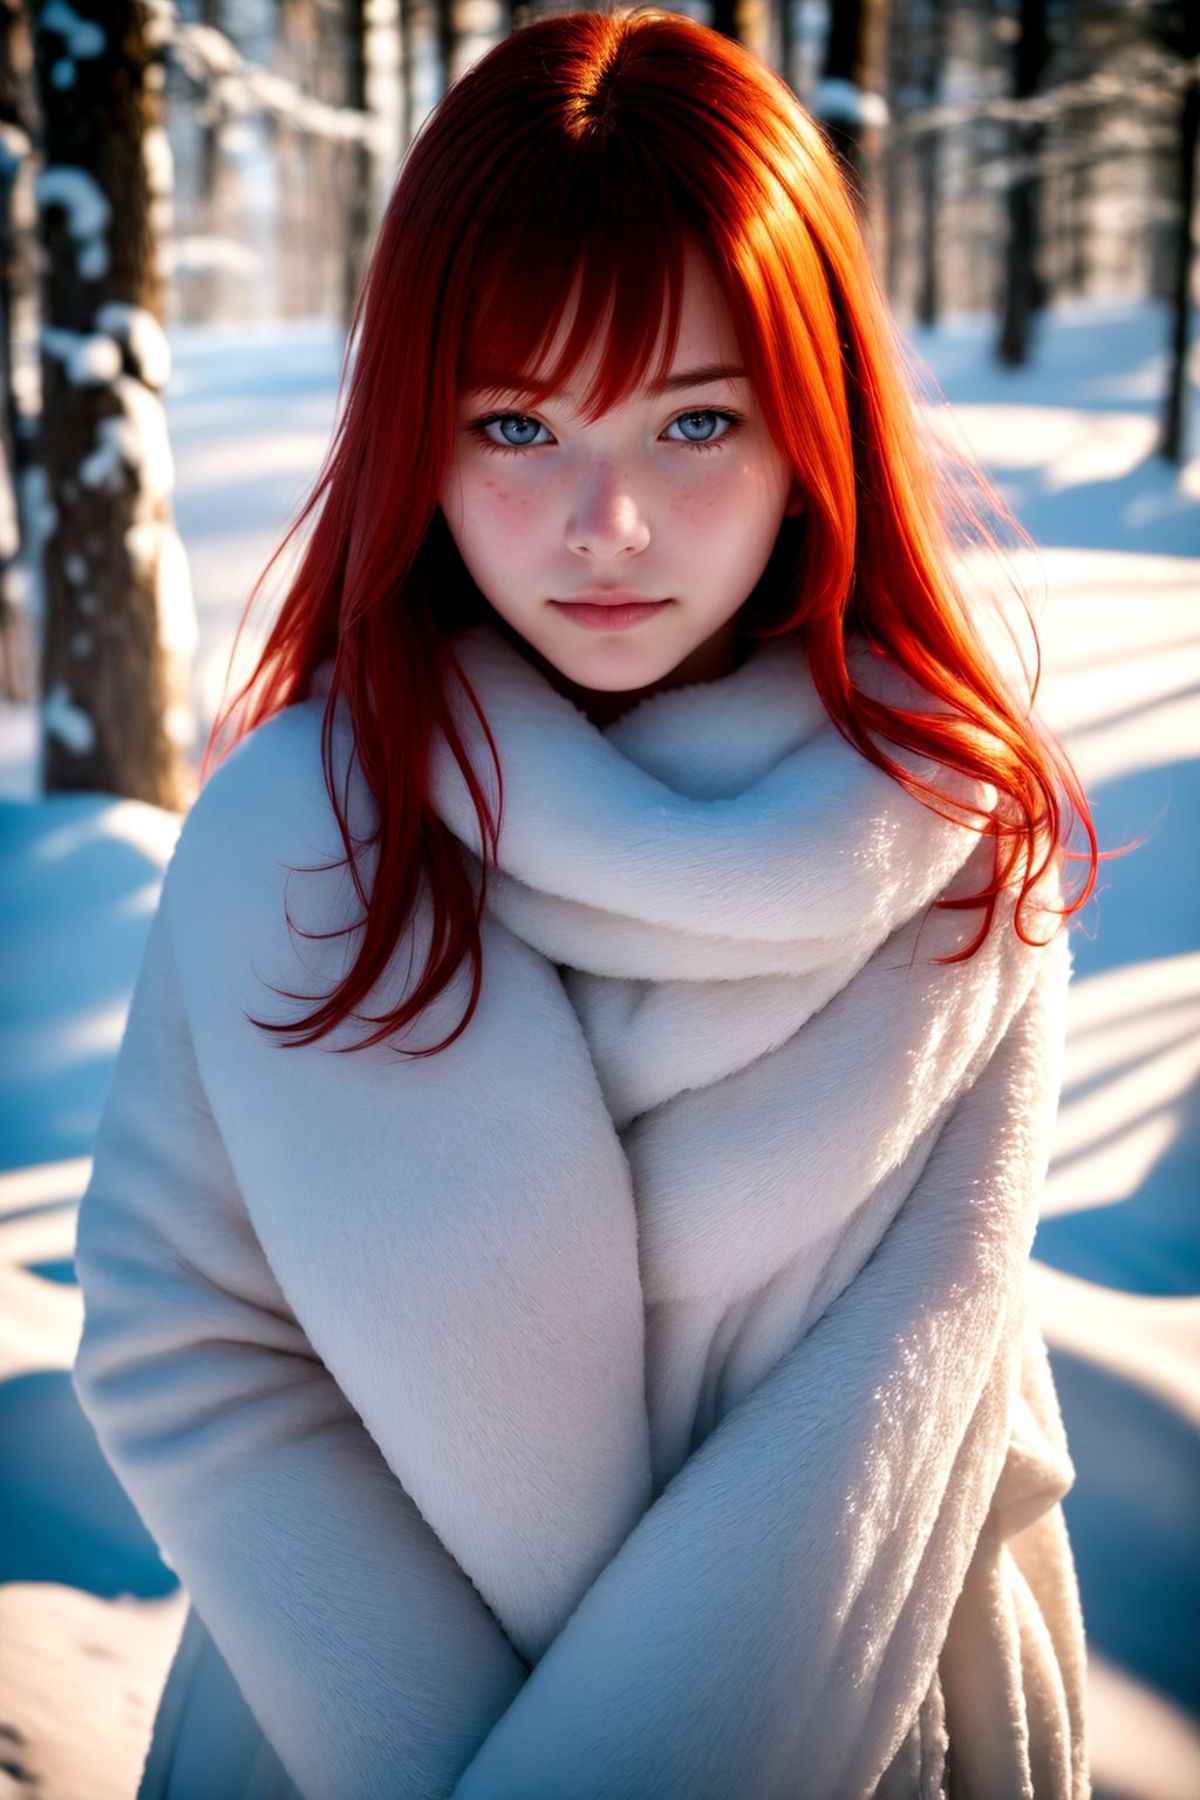 A beautiful redheaded woman wrapped in a white fur coat.